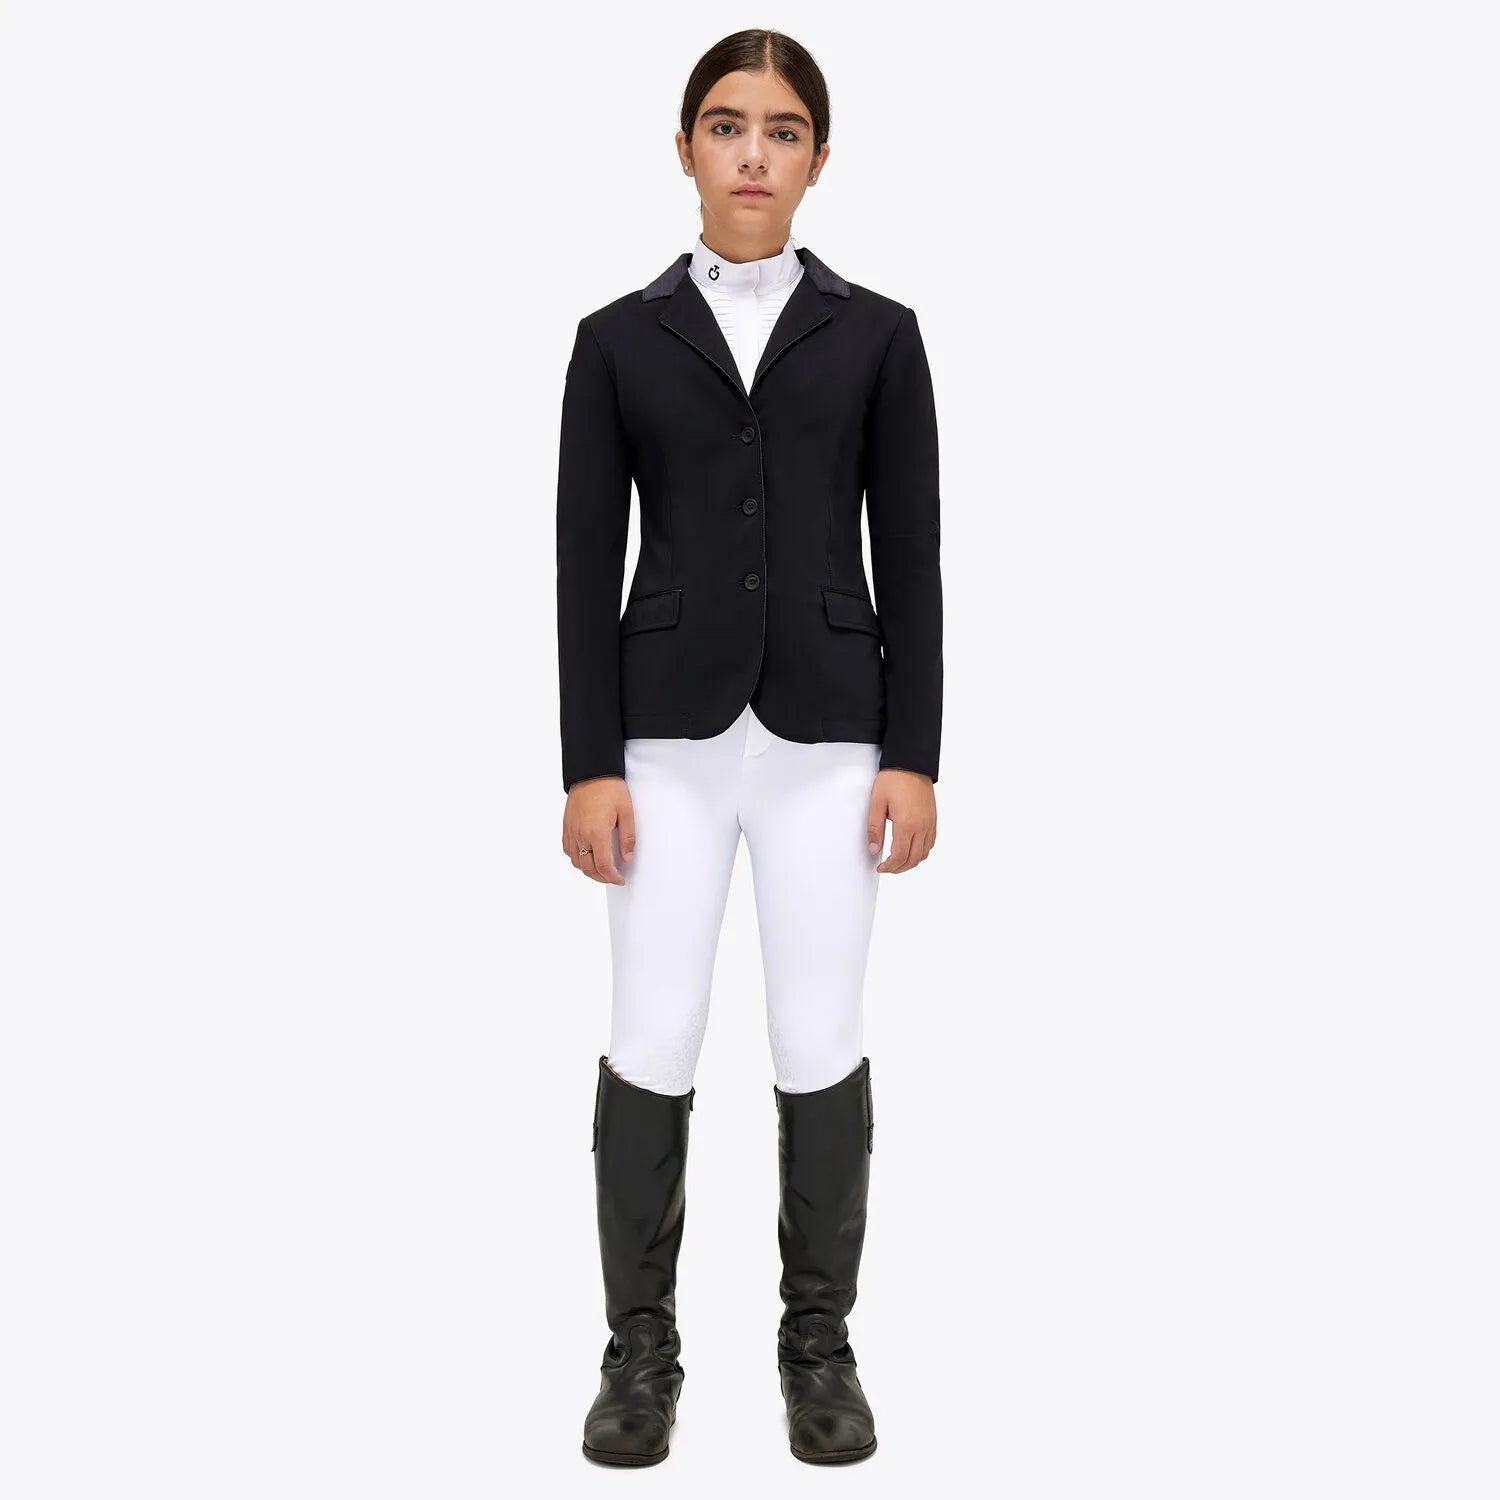 Girls Young Rider Show Jacket - Black